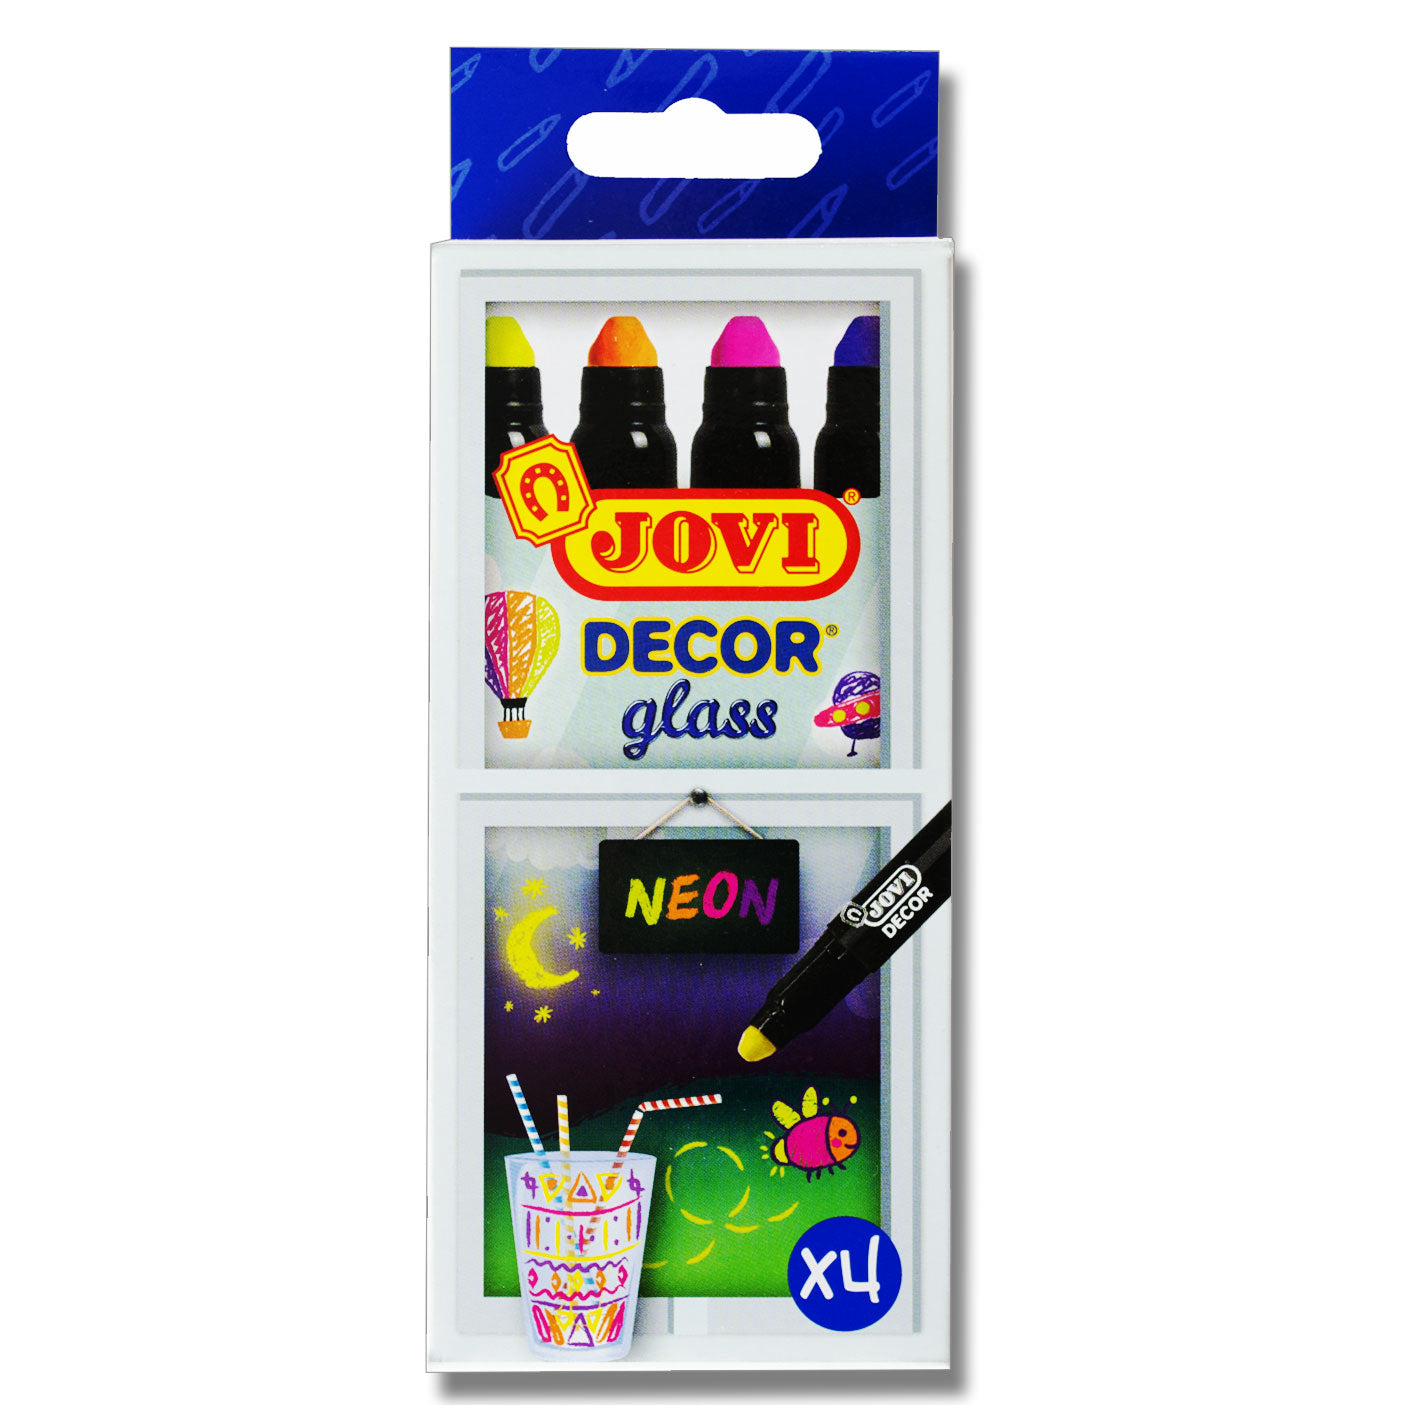 Jovi Decor Glass Wax Markers Neon Pack 4 Assorted Colours